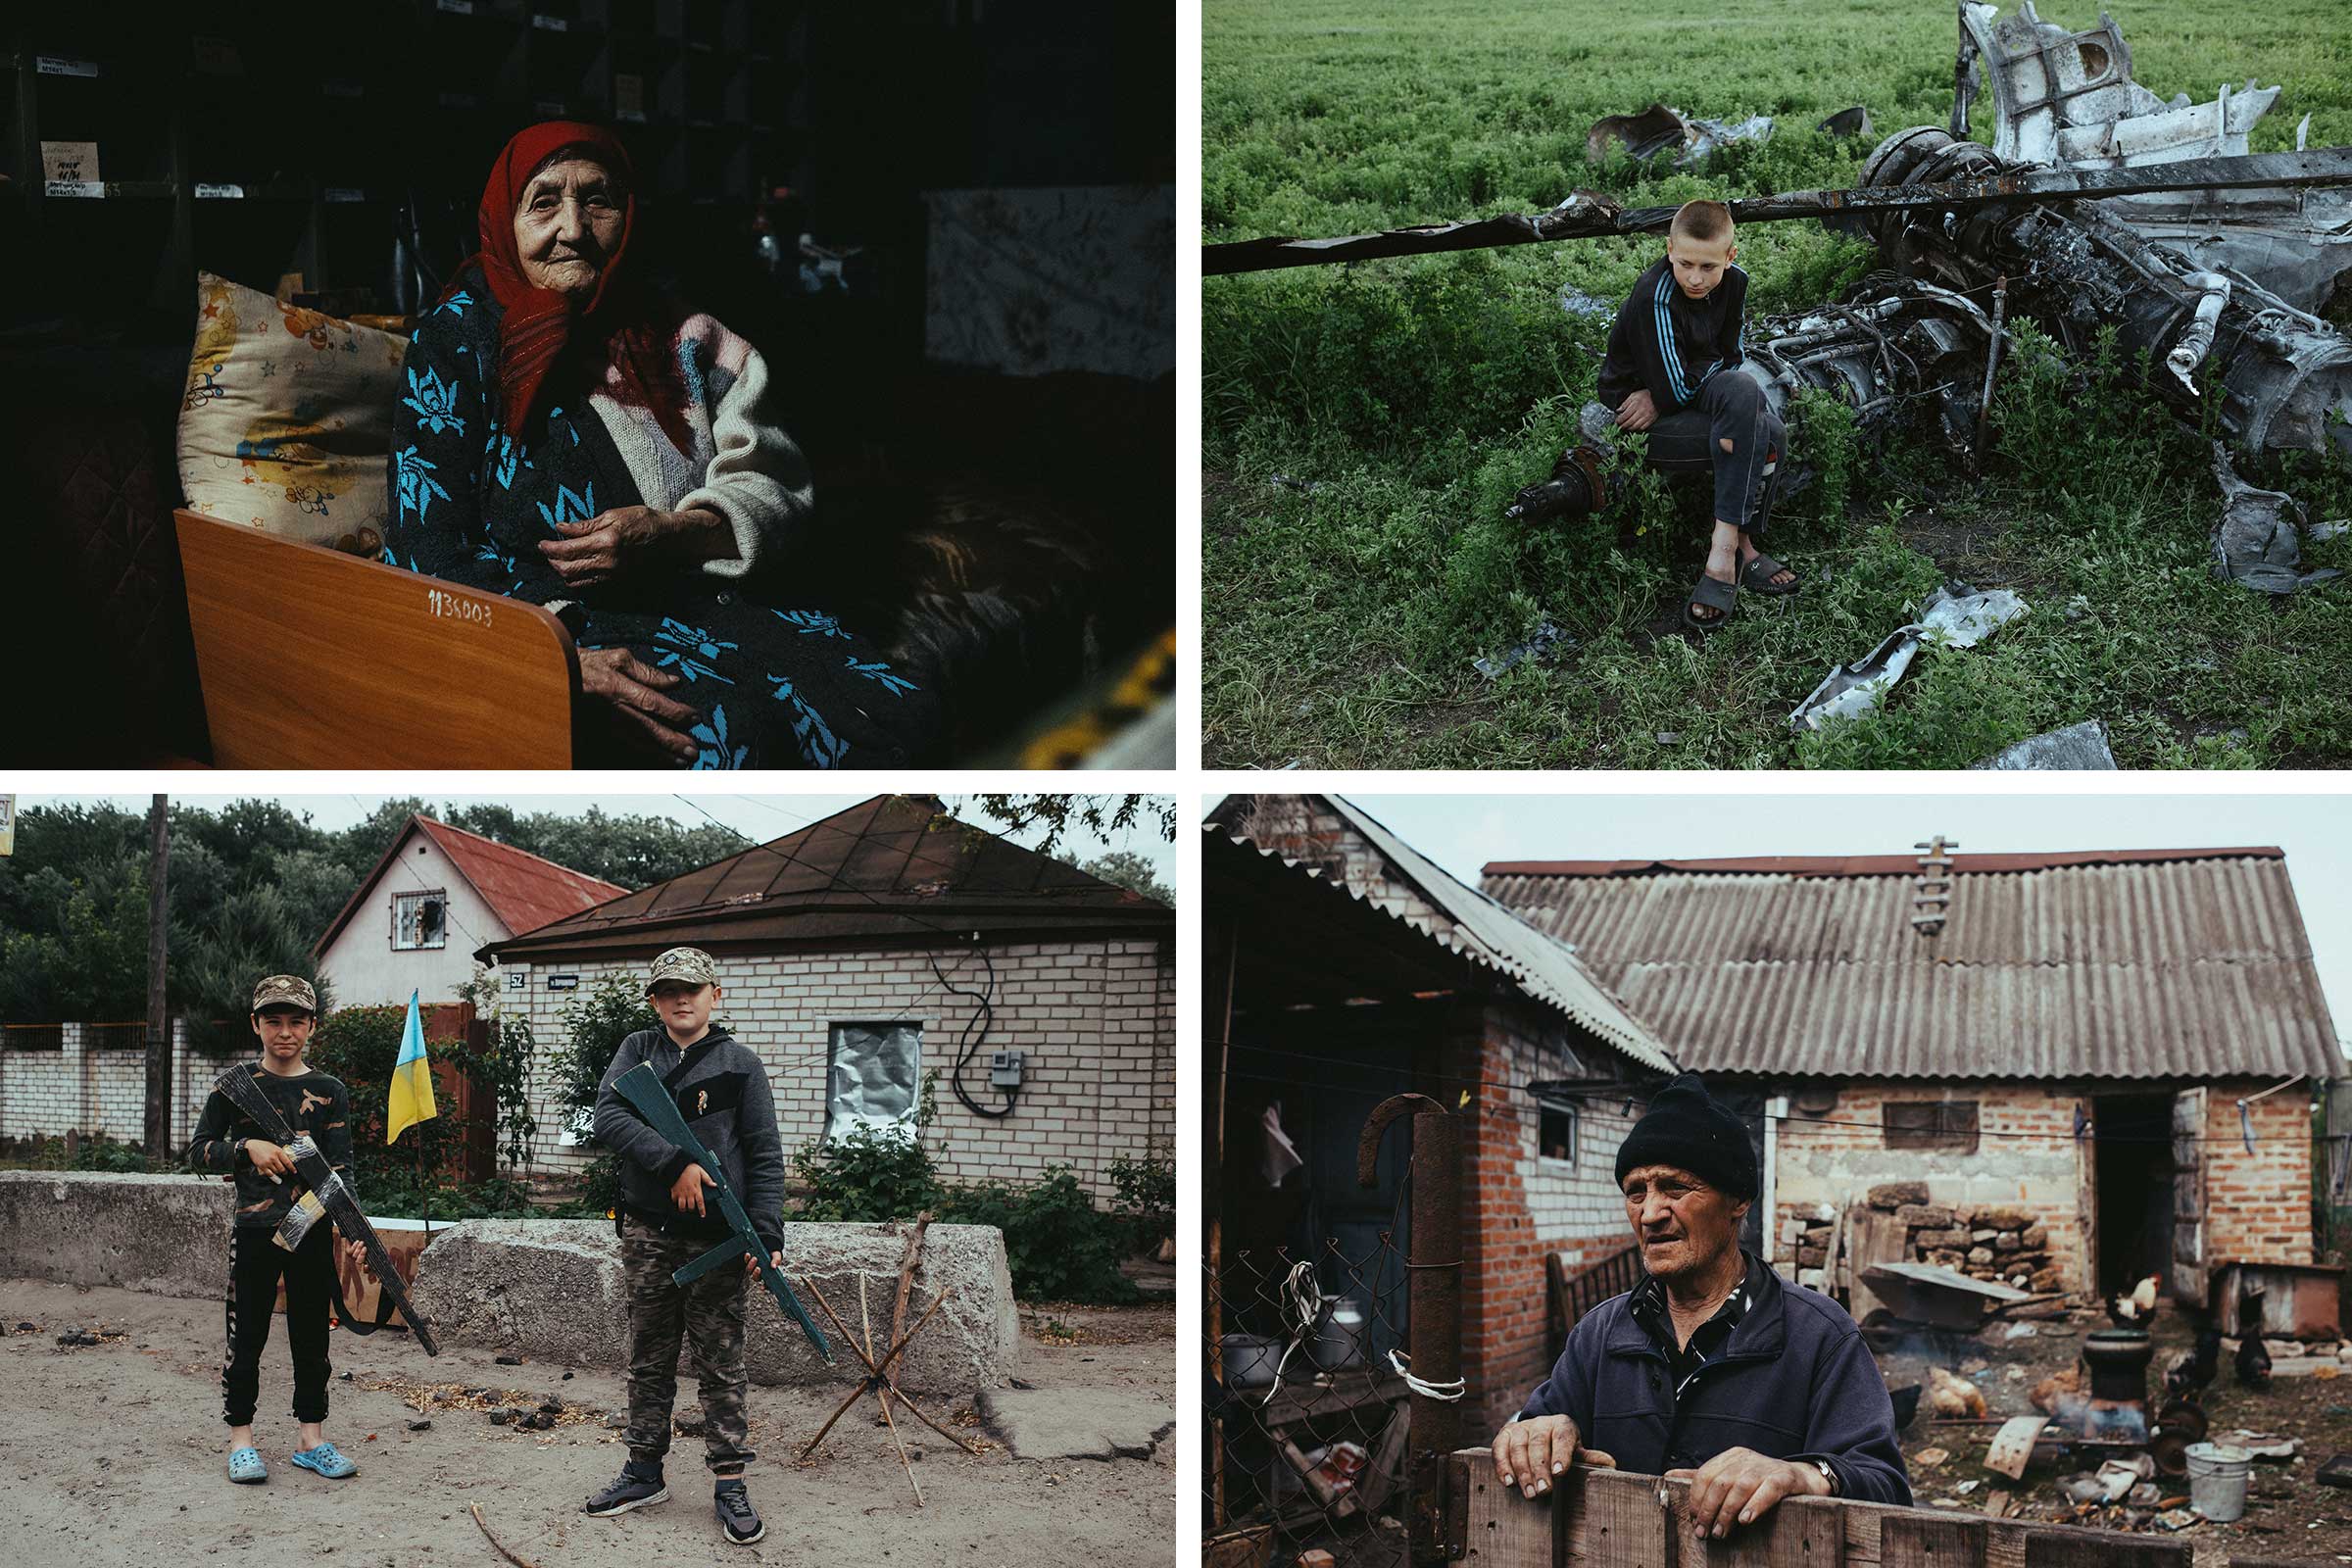 Top row: Stefania, 95, lives in a bomb shelter in the city of Chuhuiv; the remains of a destroyed Russian helicopter in the village of Malaya Rohan in May. Bottom: two friends, ages 10 and 11, establish a checkpoint near their damaged homes in the Kharkiv region; Volodymyr, 76, cooks in the courtyard of his home in the village of Vilkhivka. (Maxim Dondyuk)